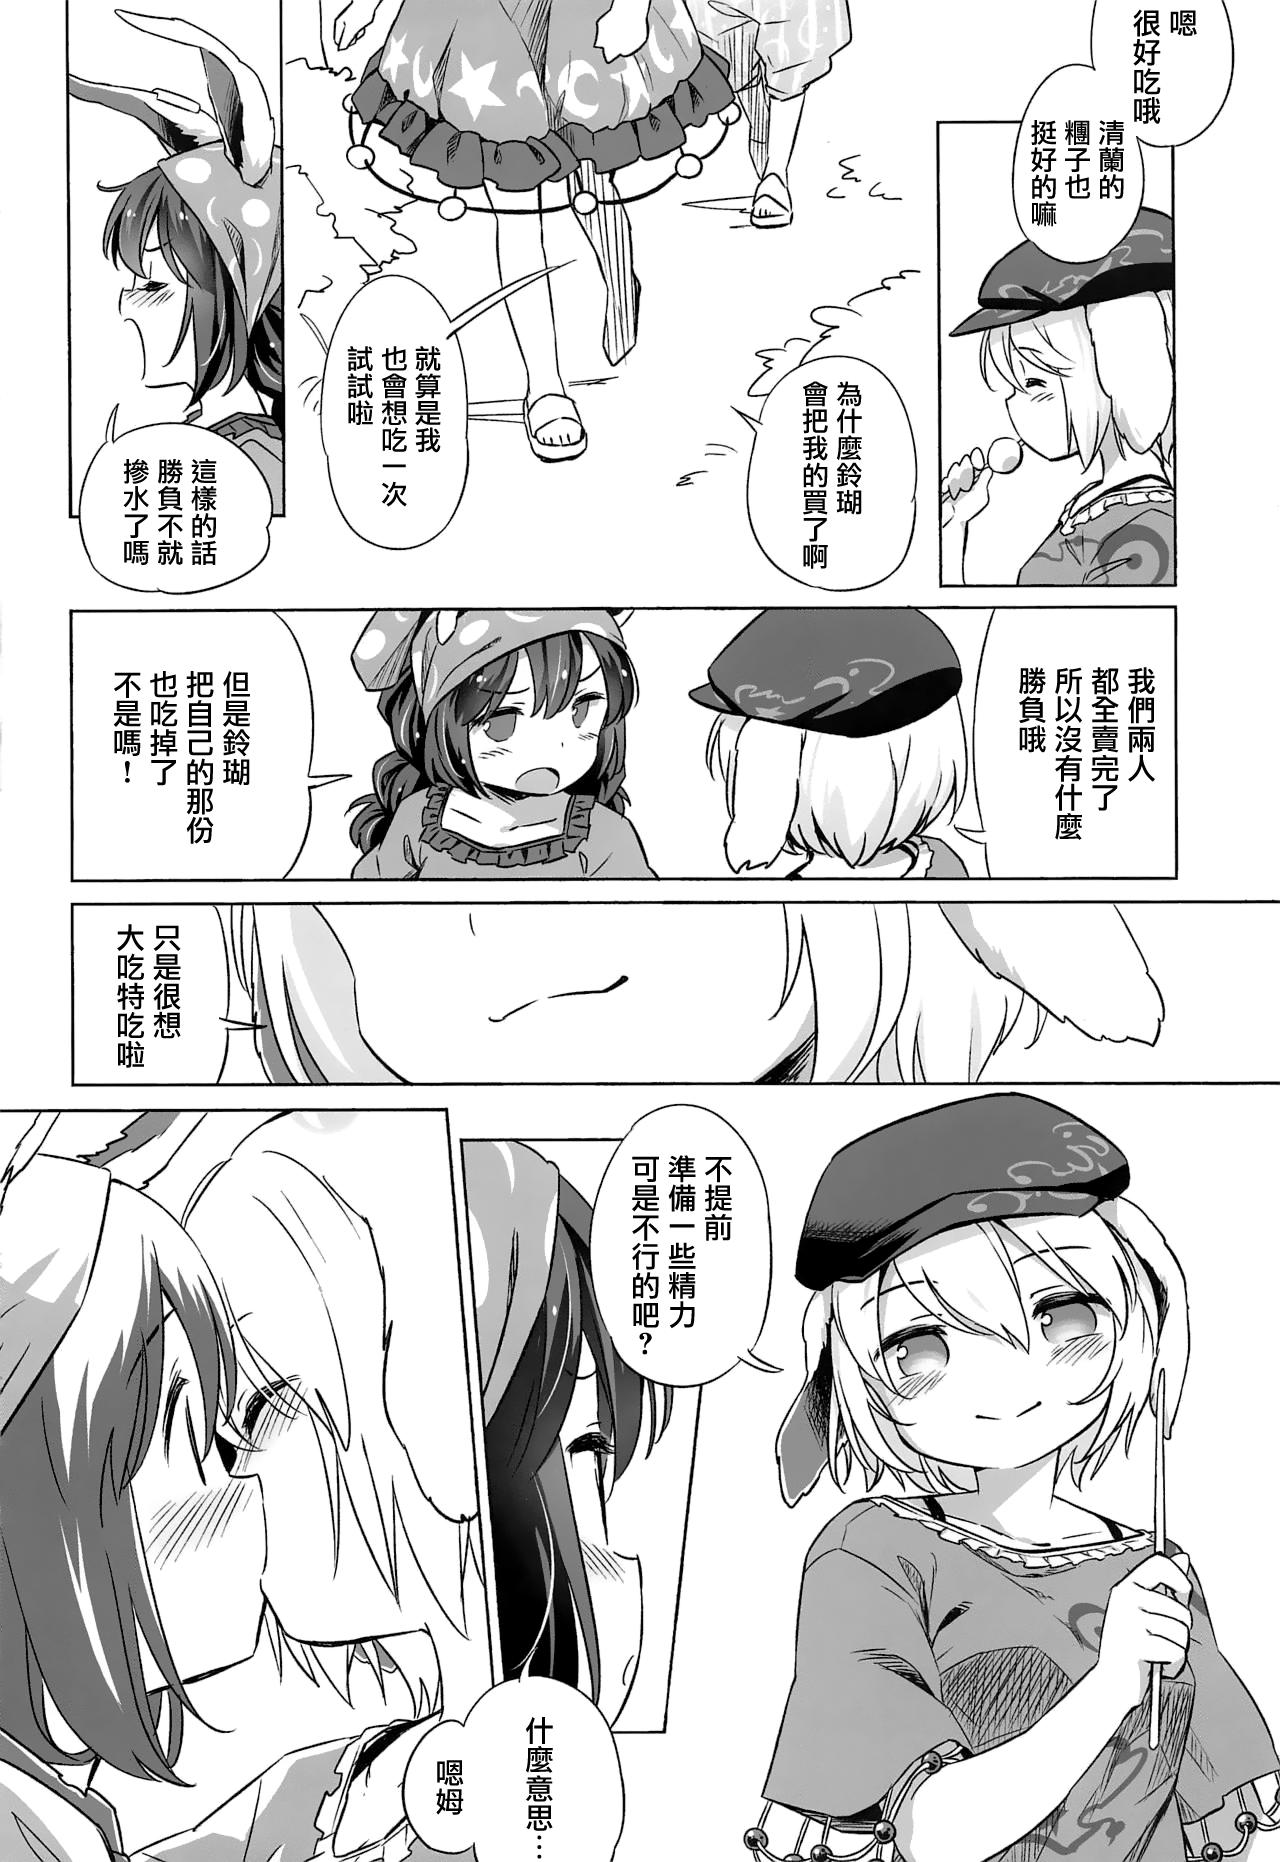 Hardcoresex Granny Smith Mating - Touhou project Lesbian Sex - Page 11